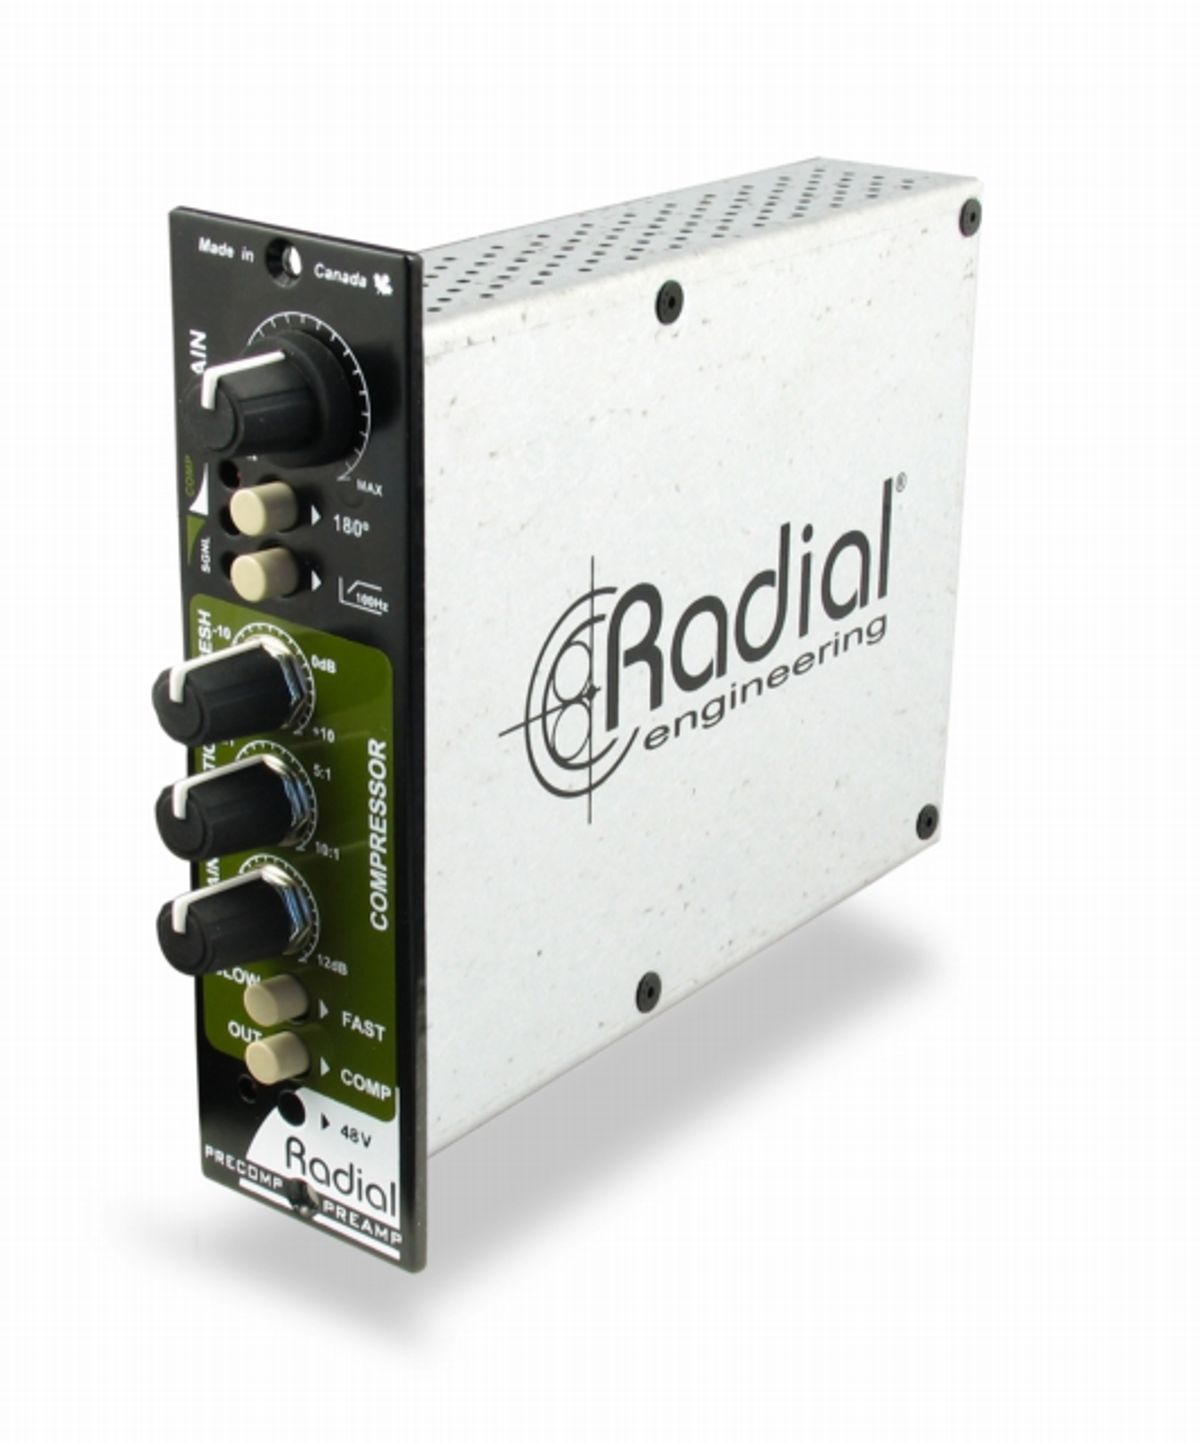 Radial Engineering Announces the PreComp 500